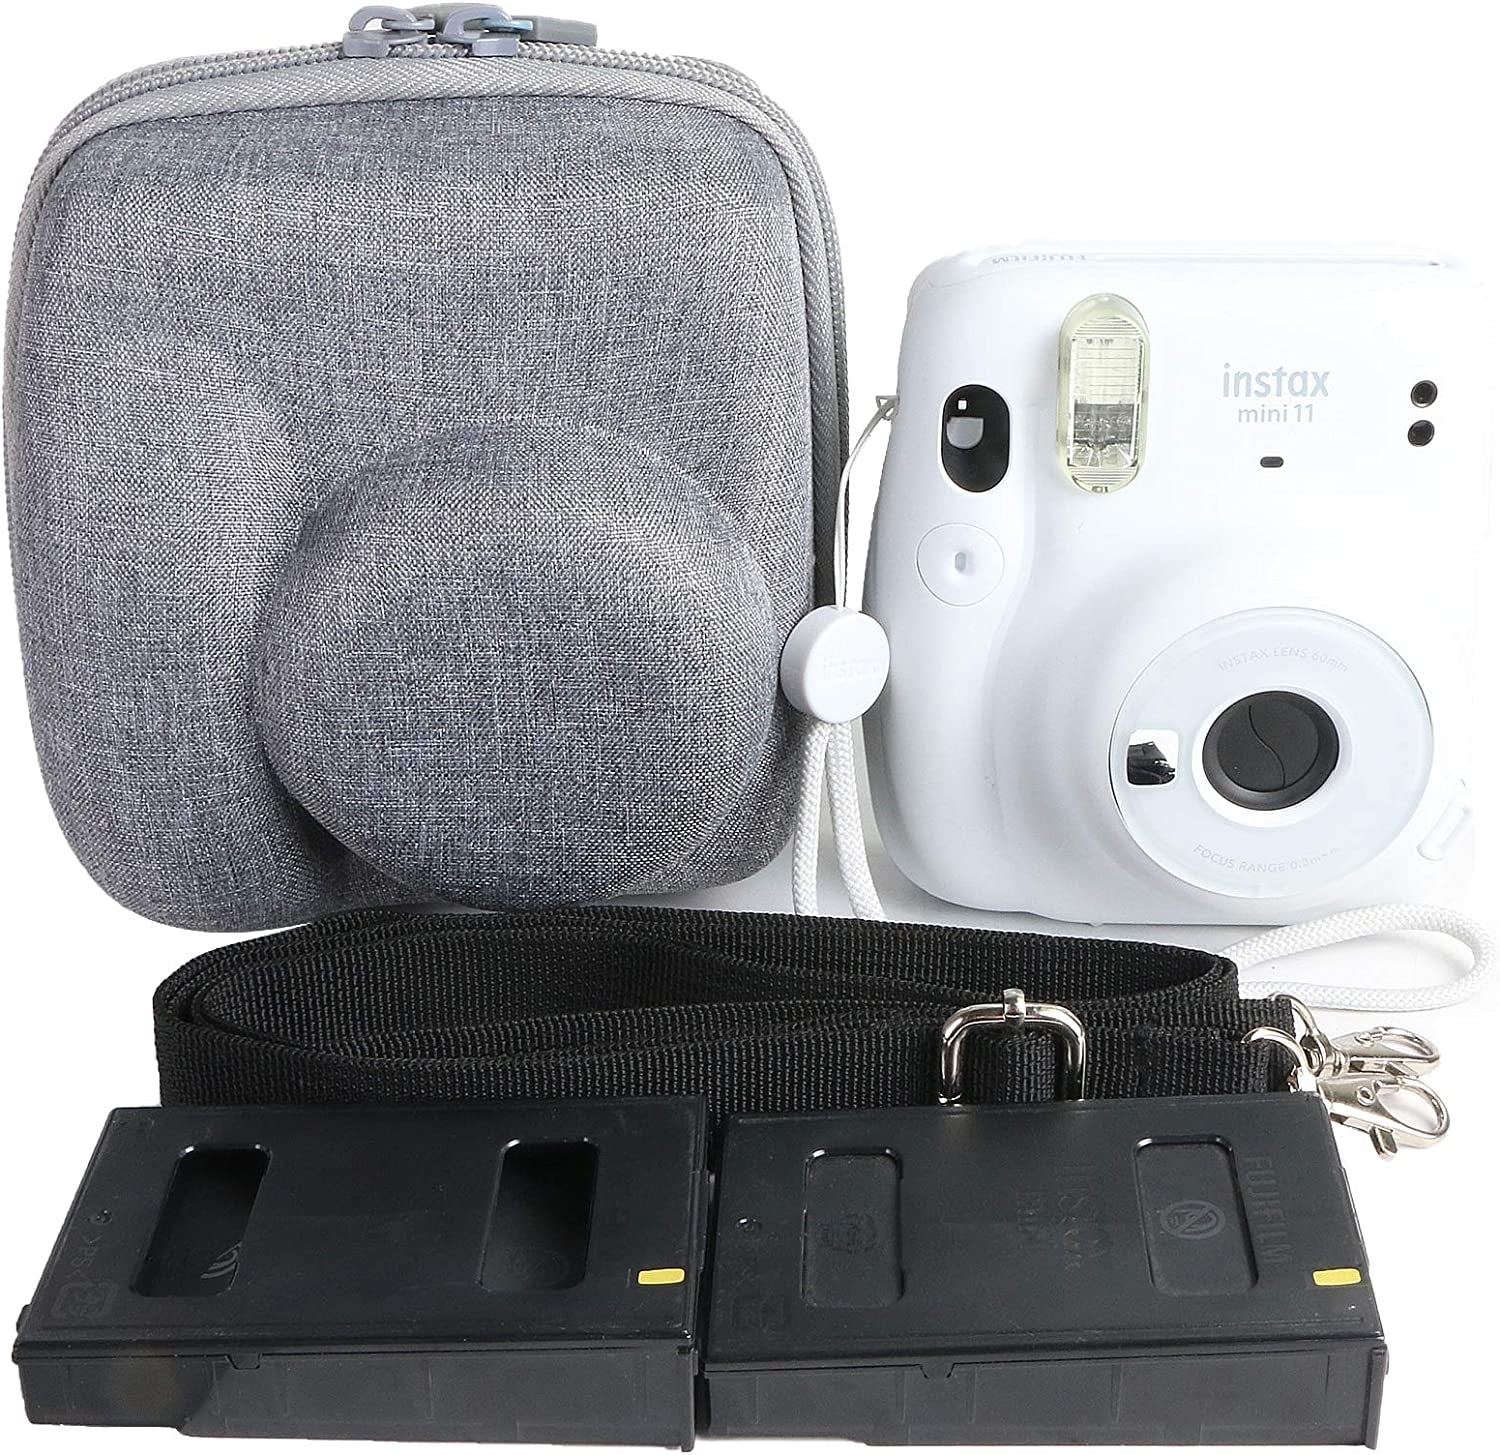 Hard Carrying Case Replacement for Fujifilm Instax Mini 11 Instant Camera (Gray)